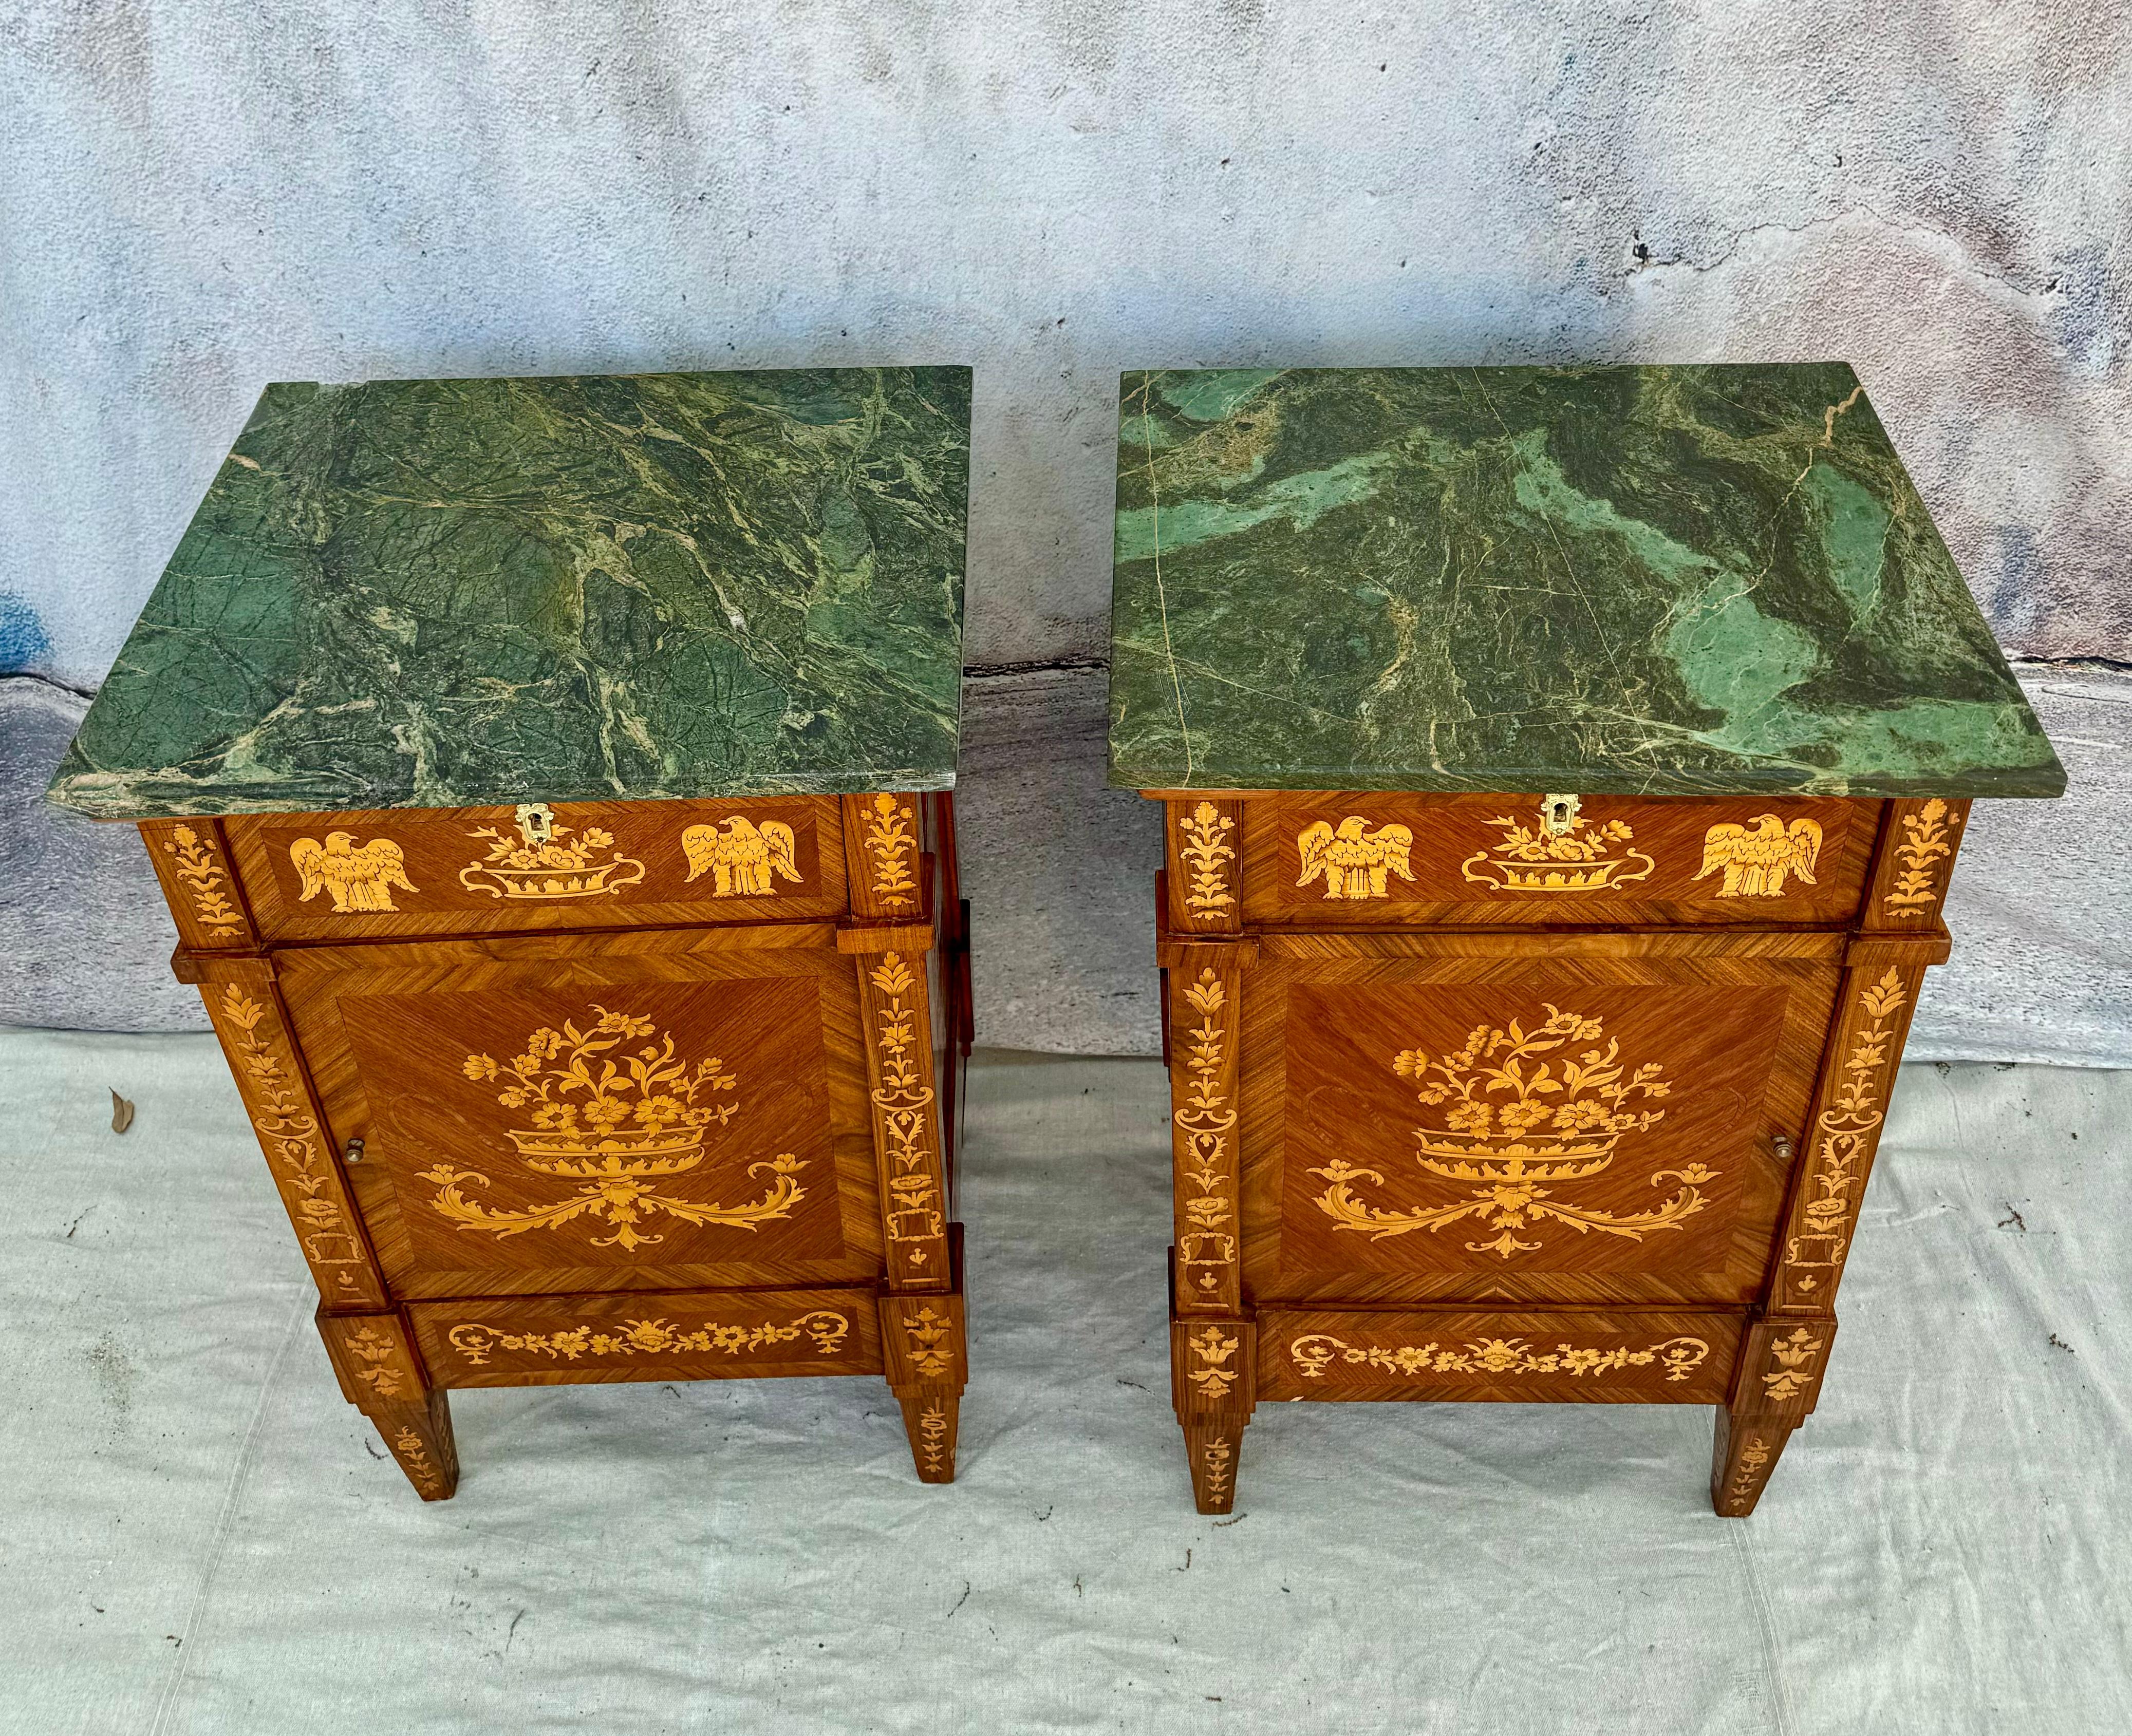 20th Century Pair Of Italian Maggiolini Style Inlaid Bedside Tables For Sale